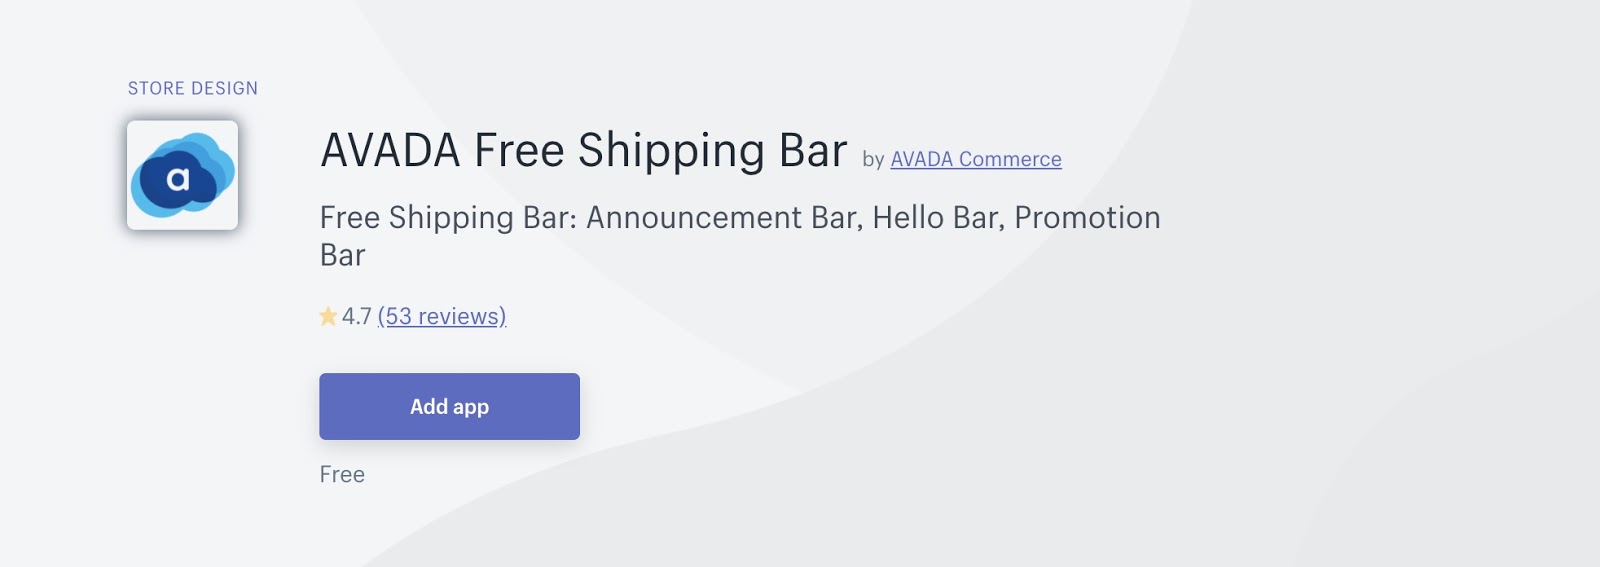 How Much Does It Cost To buy AVADA free shipping bar apps on Shopify